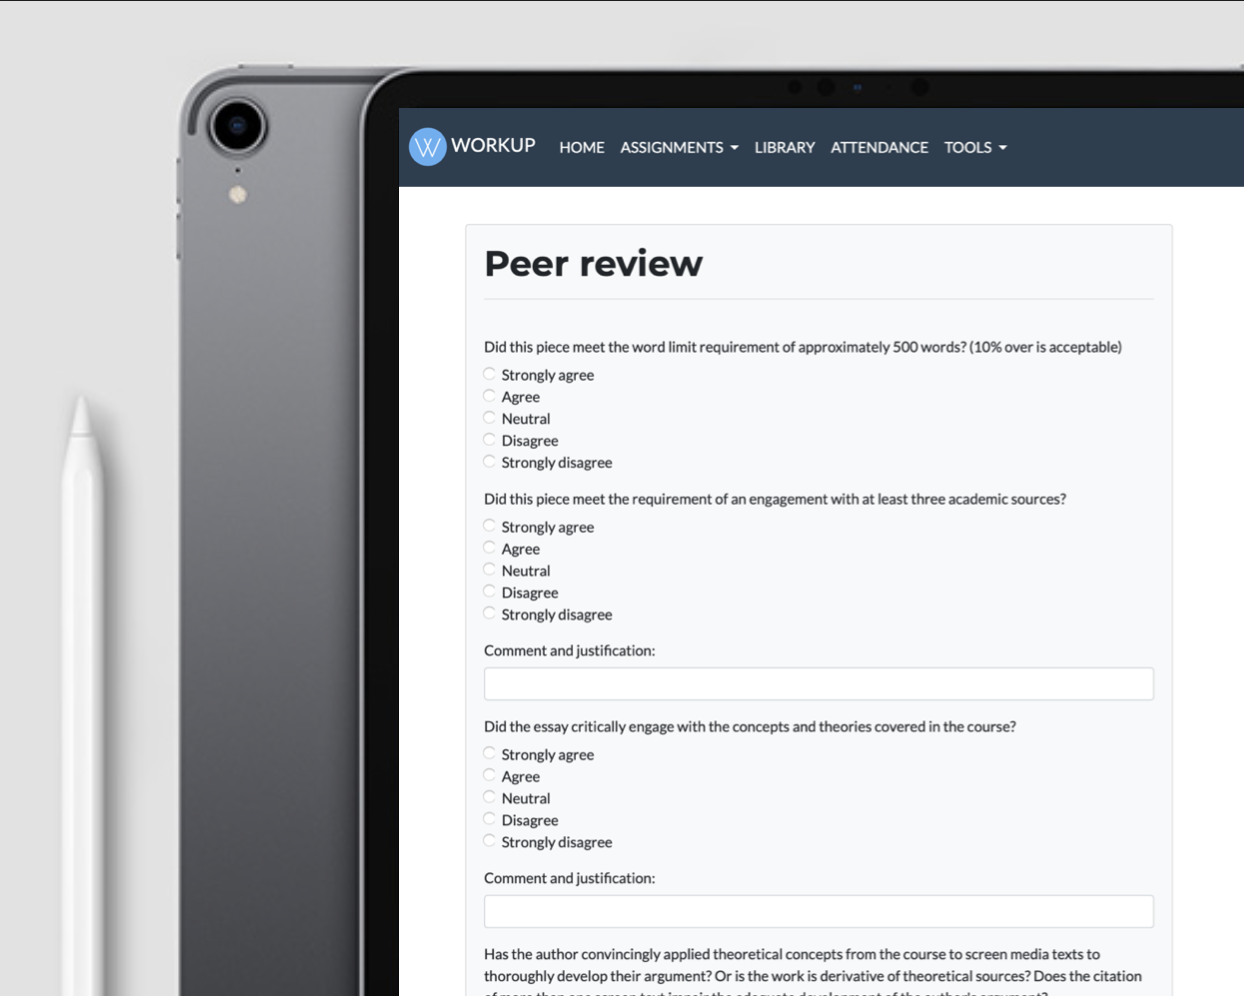 Submit peer review